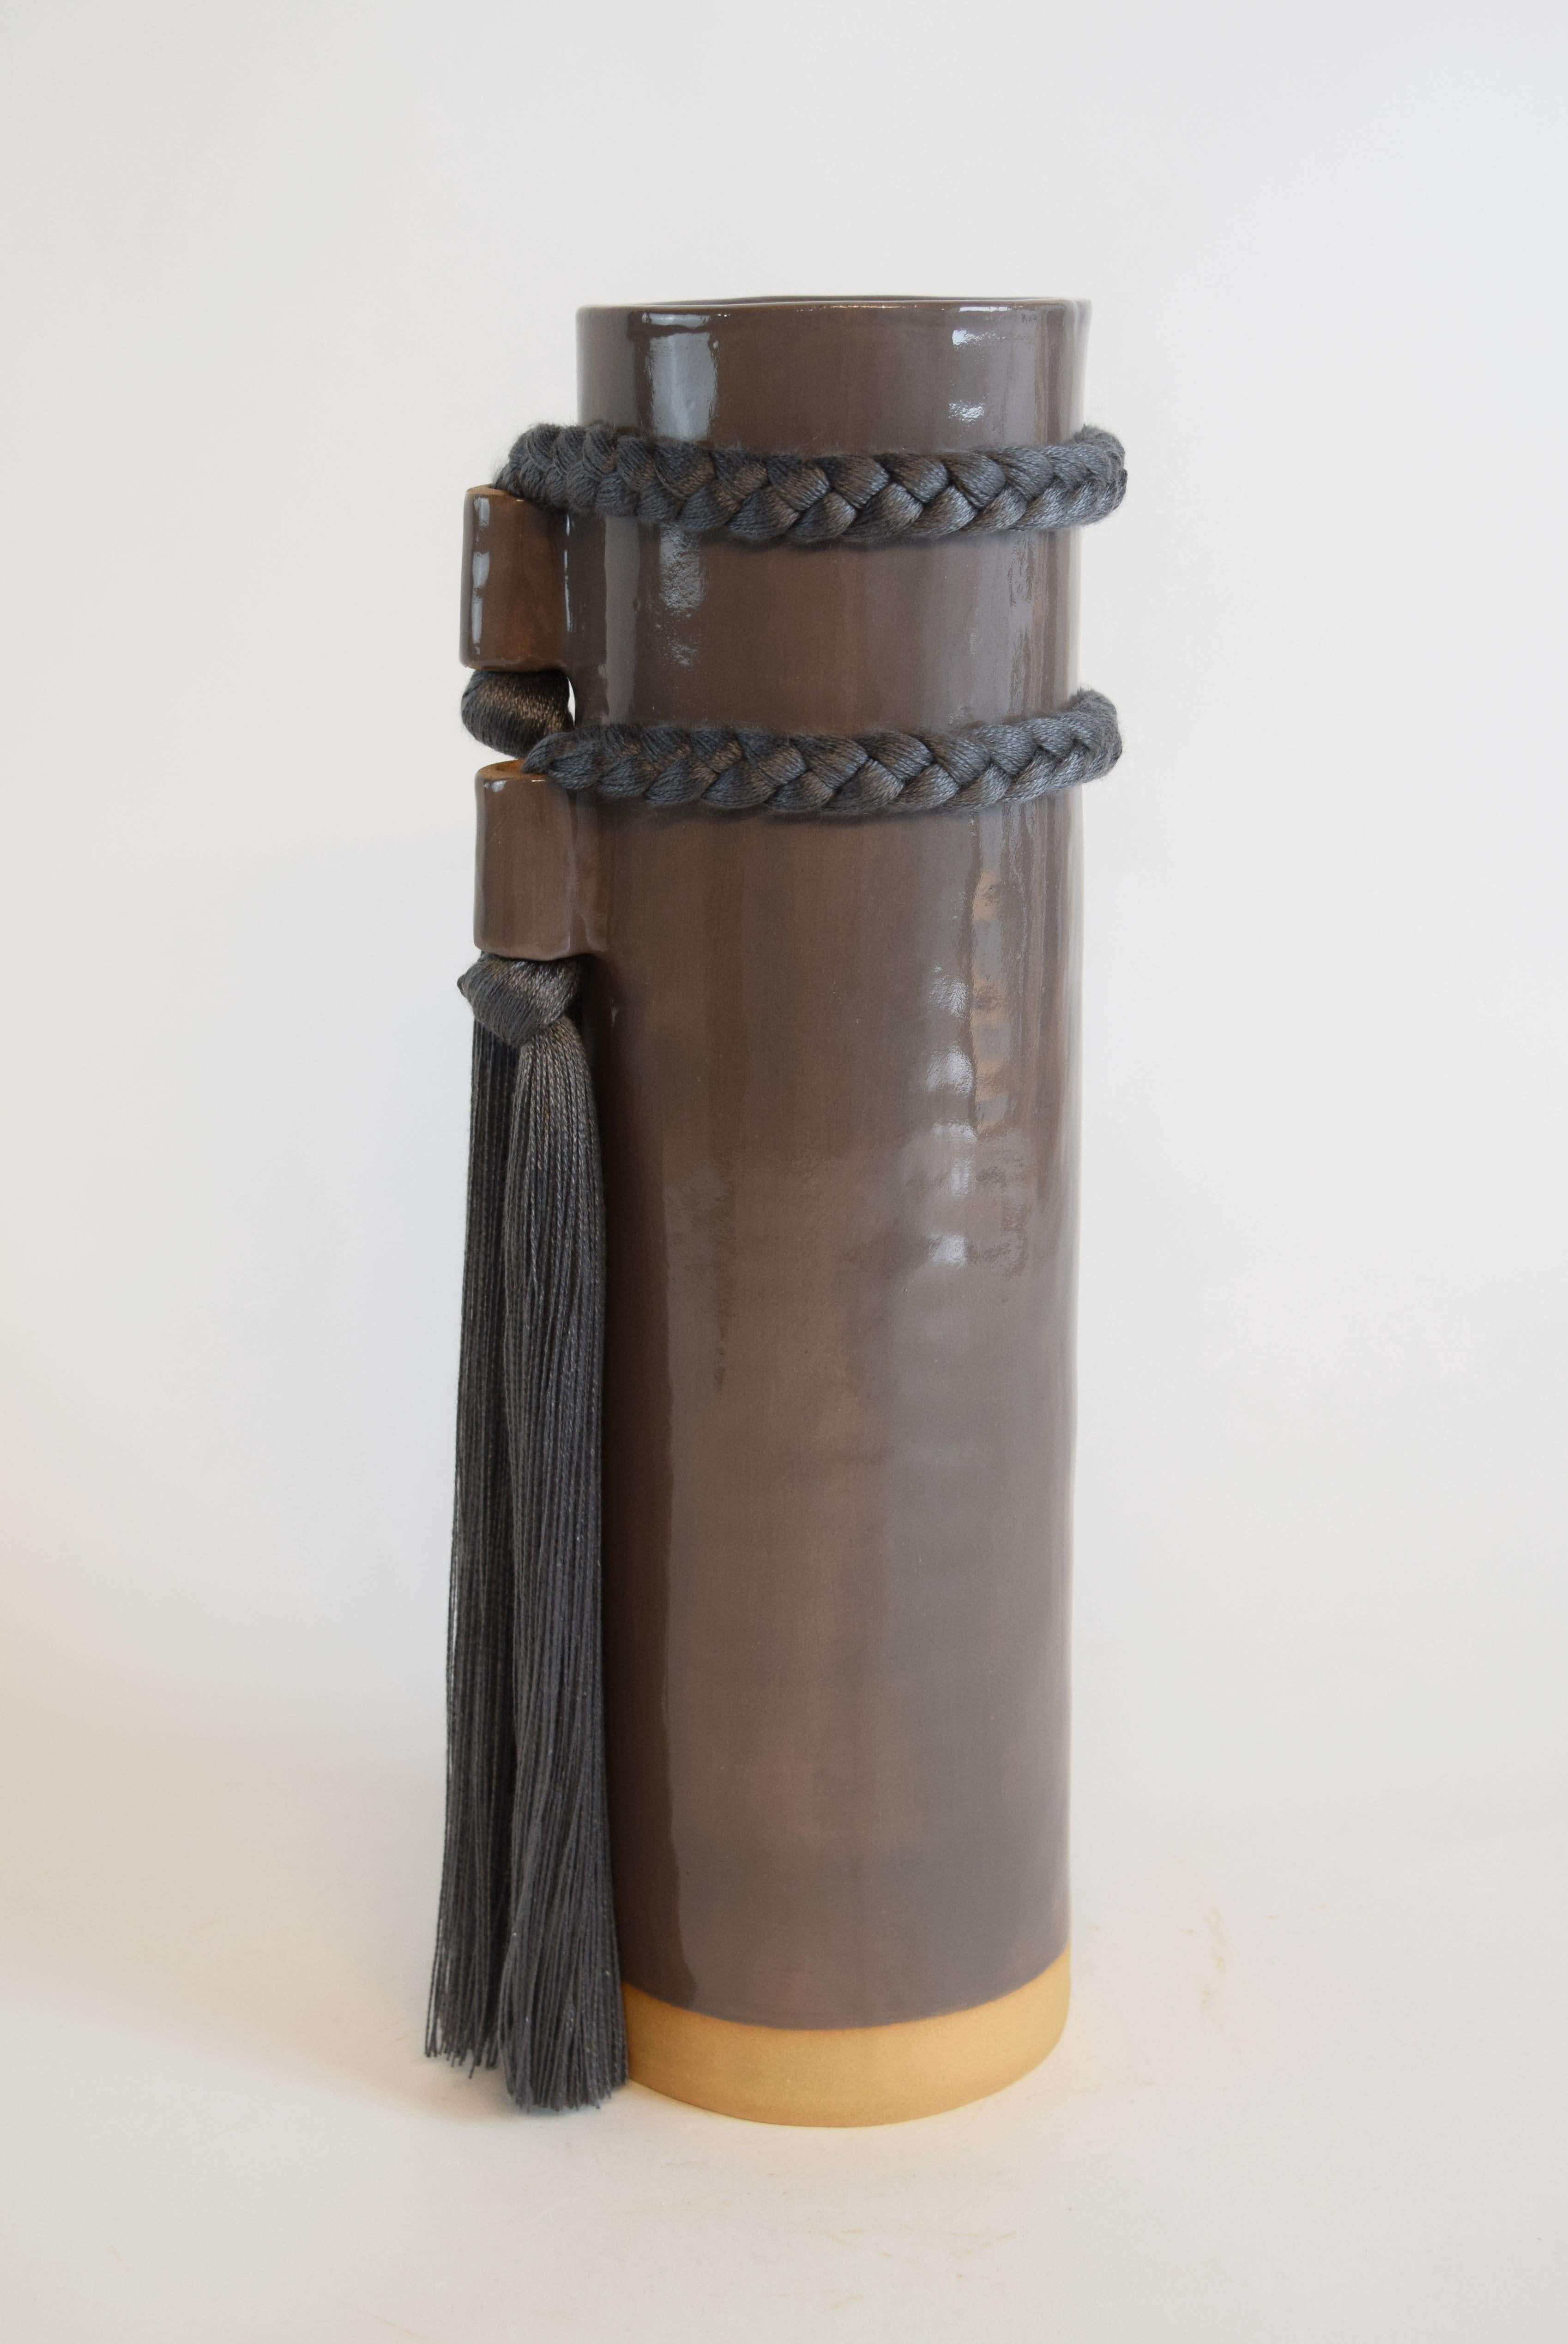 American Handmade Ceramic Vase #735 in Charcoal with Tencel Braided & Fringe Details For Sale